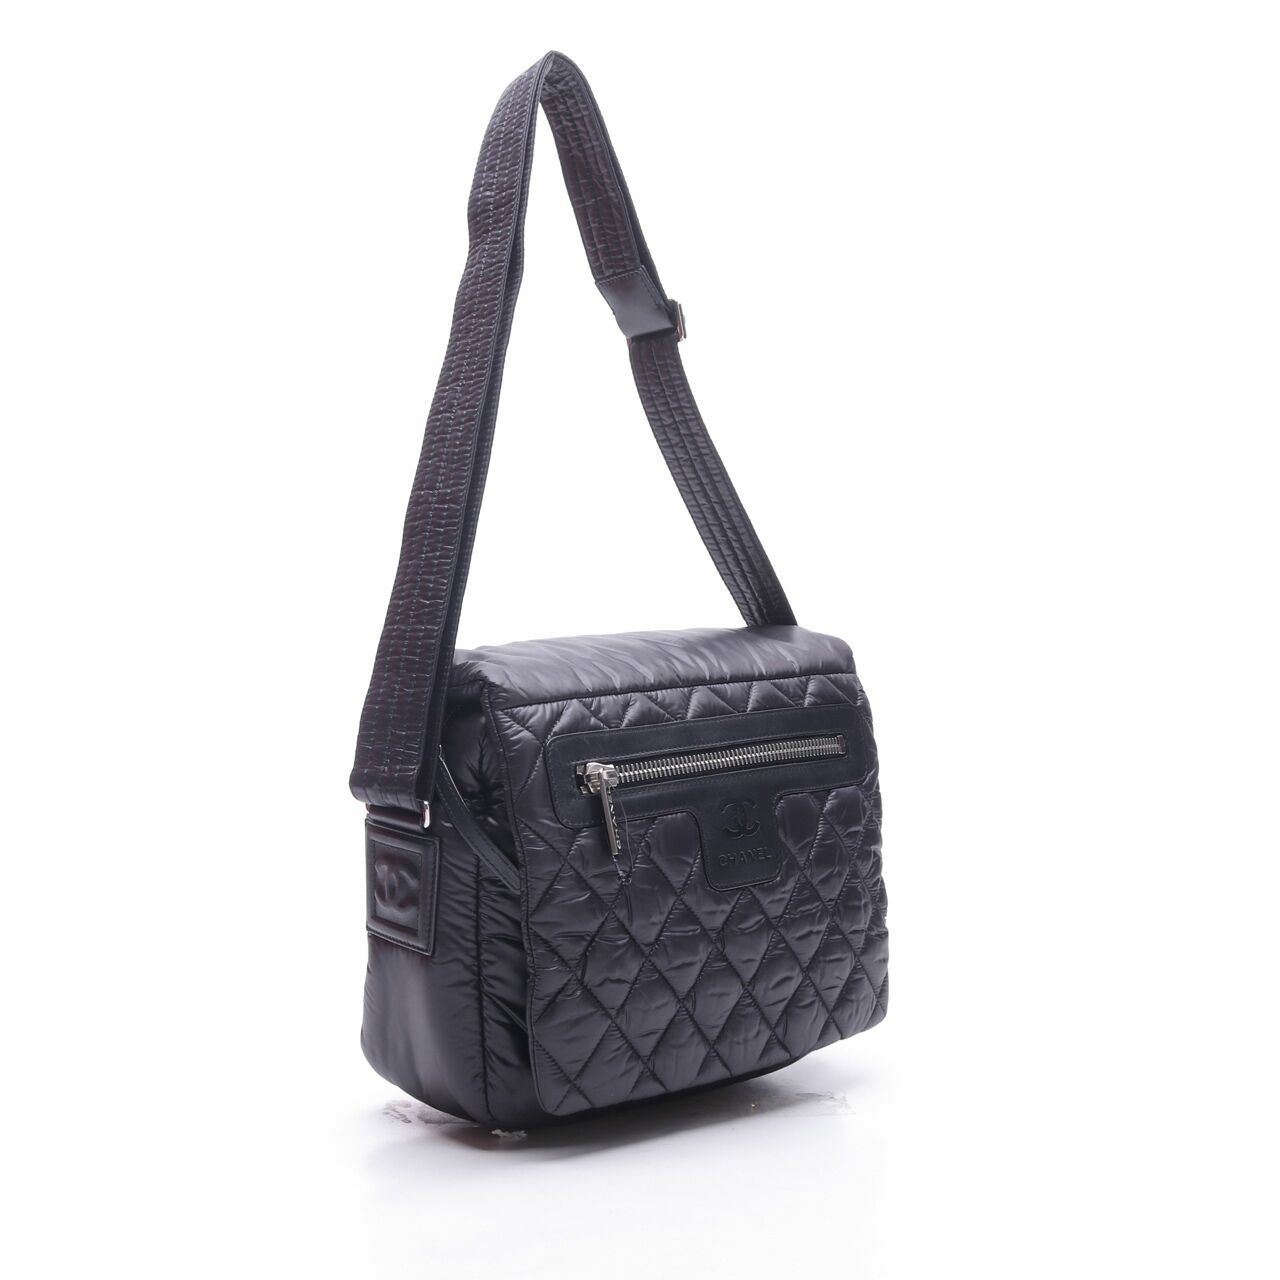  Chanel Black Quilted Nylon Coco Cocoon Small Messenger Slingbag